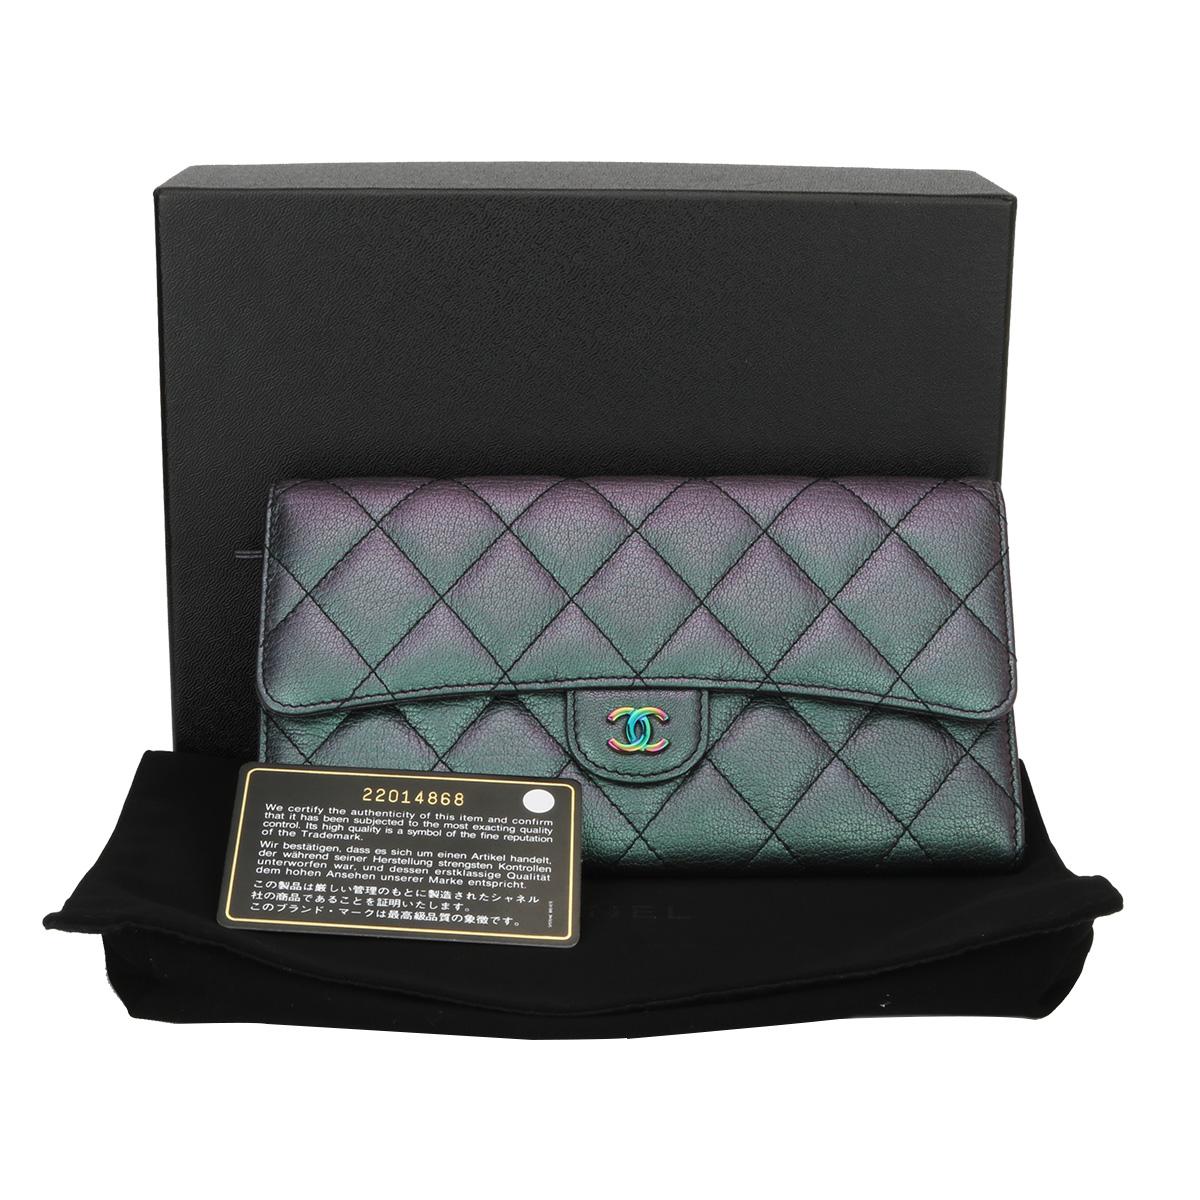 Authentic CHANEL Purple Iridescent Goatskin Flap Wallet with Rainbow Hardware 2016 LIMITED EDITION.

This stunning flap wallet is in a mint condition, it still holds its original shape, and the hardware is still very shiny. Leather smells fresh as